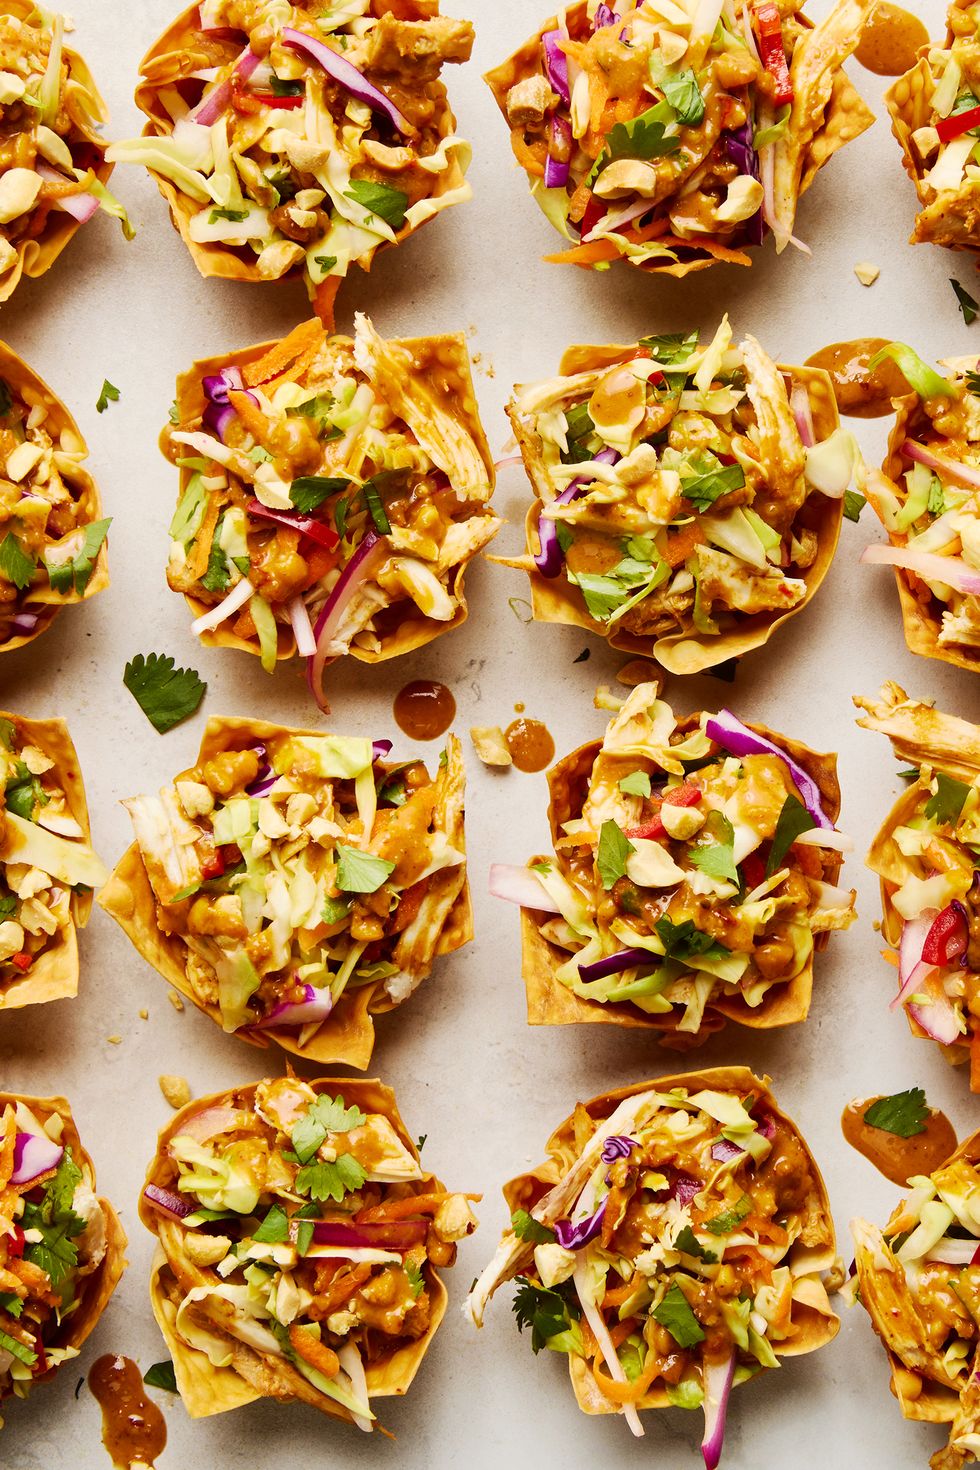 shredded rotisserie chicken gets tossed in a spicy sweet peanut sauce, stuffed in a crispy baked wonton shell, and topped with bright, colorful, and crunchy veggies to make this easy two bite app